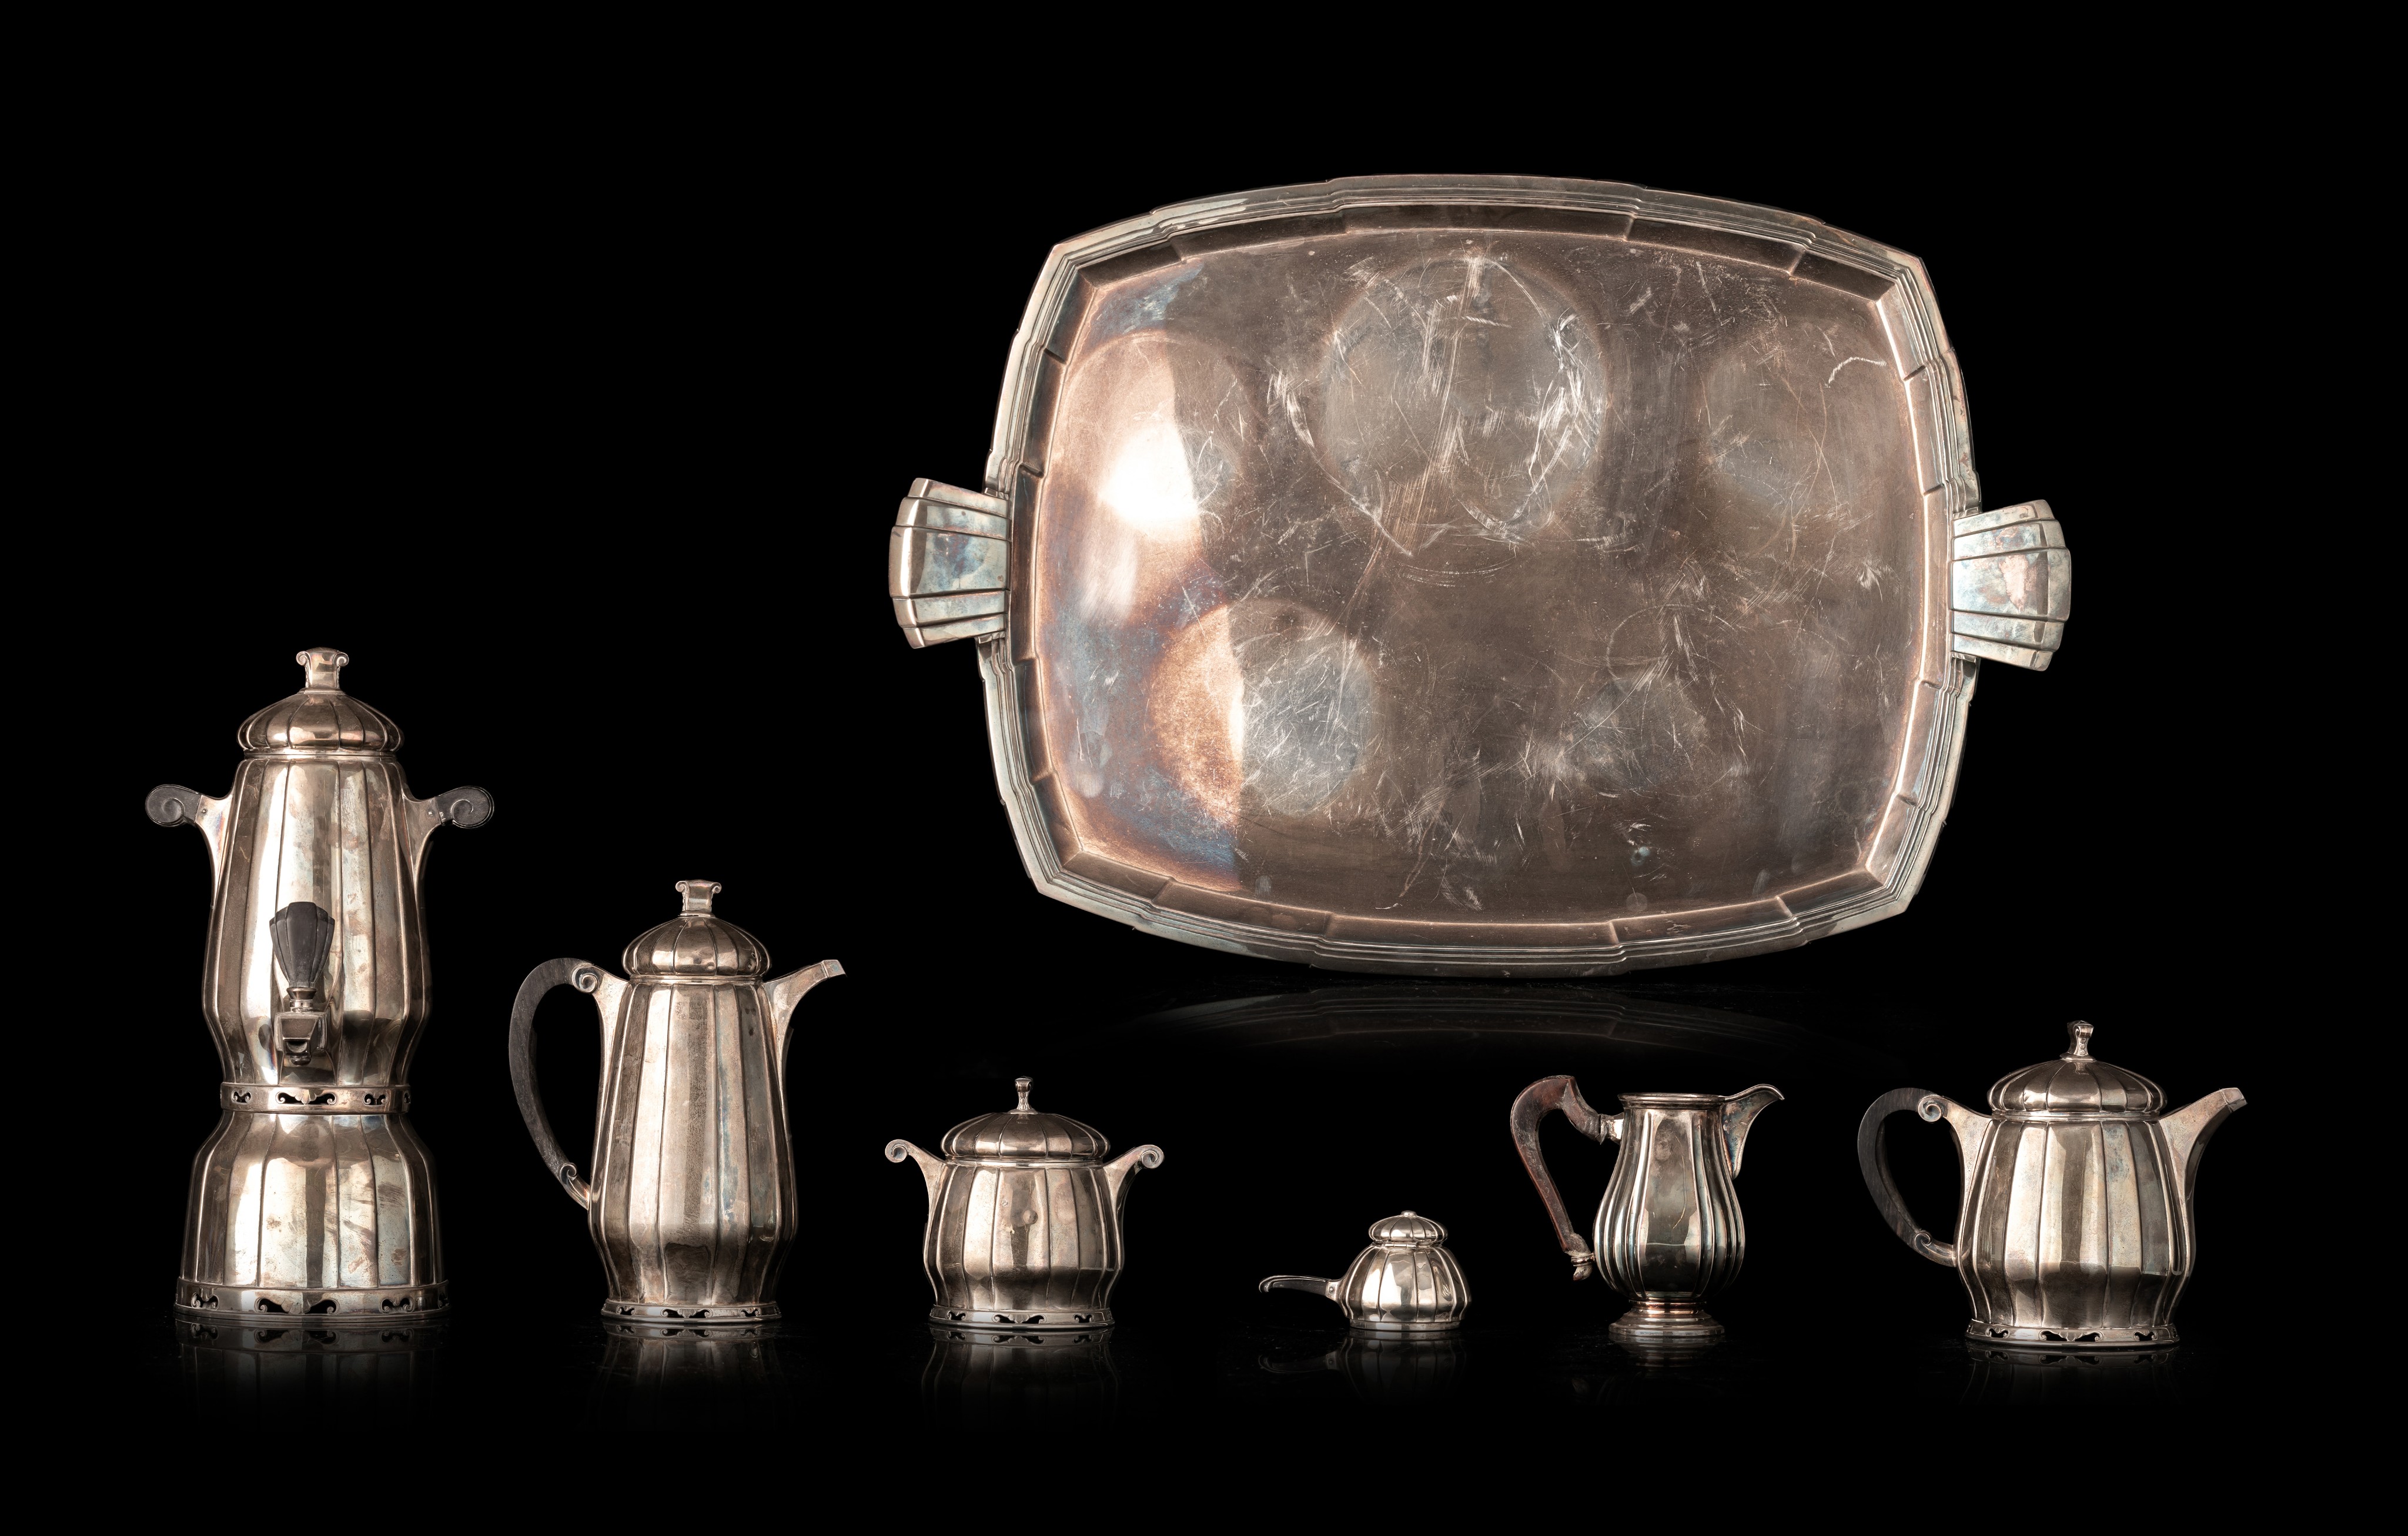 A four-part silver Art Deco coffee and tea set, marked Altenloh, 950/000, H 14 - 37 cm, weight: 4.29